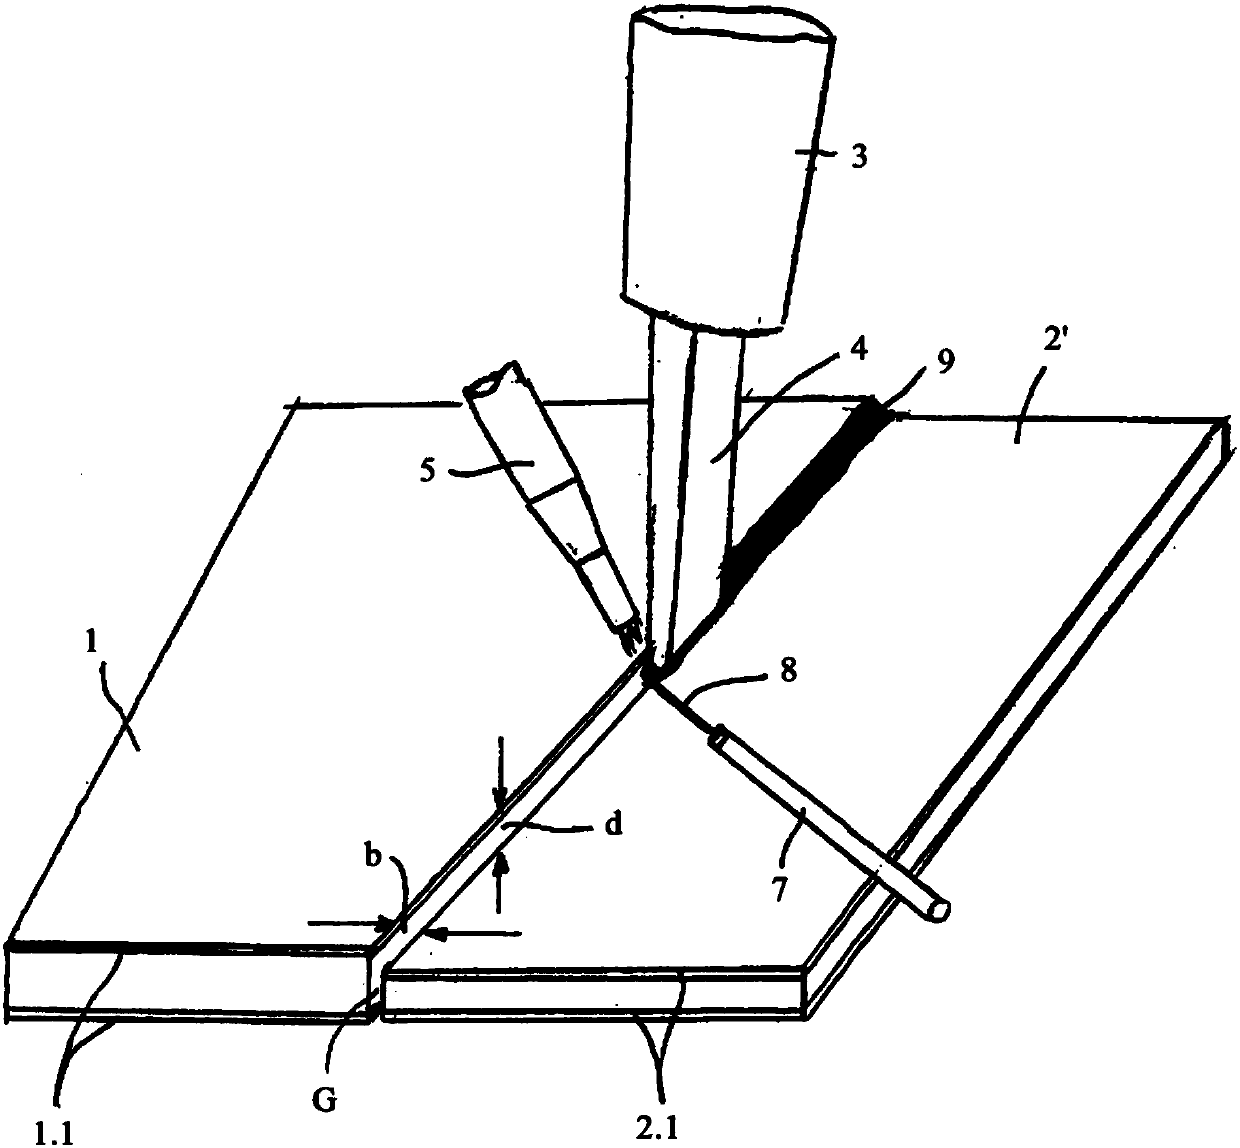 Laser welding method for producing a semi-finished sheet metal product from hardenable steel, comprising an aluminum- or aluminum-silicon-based coating